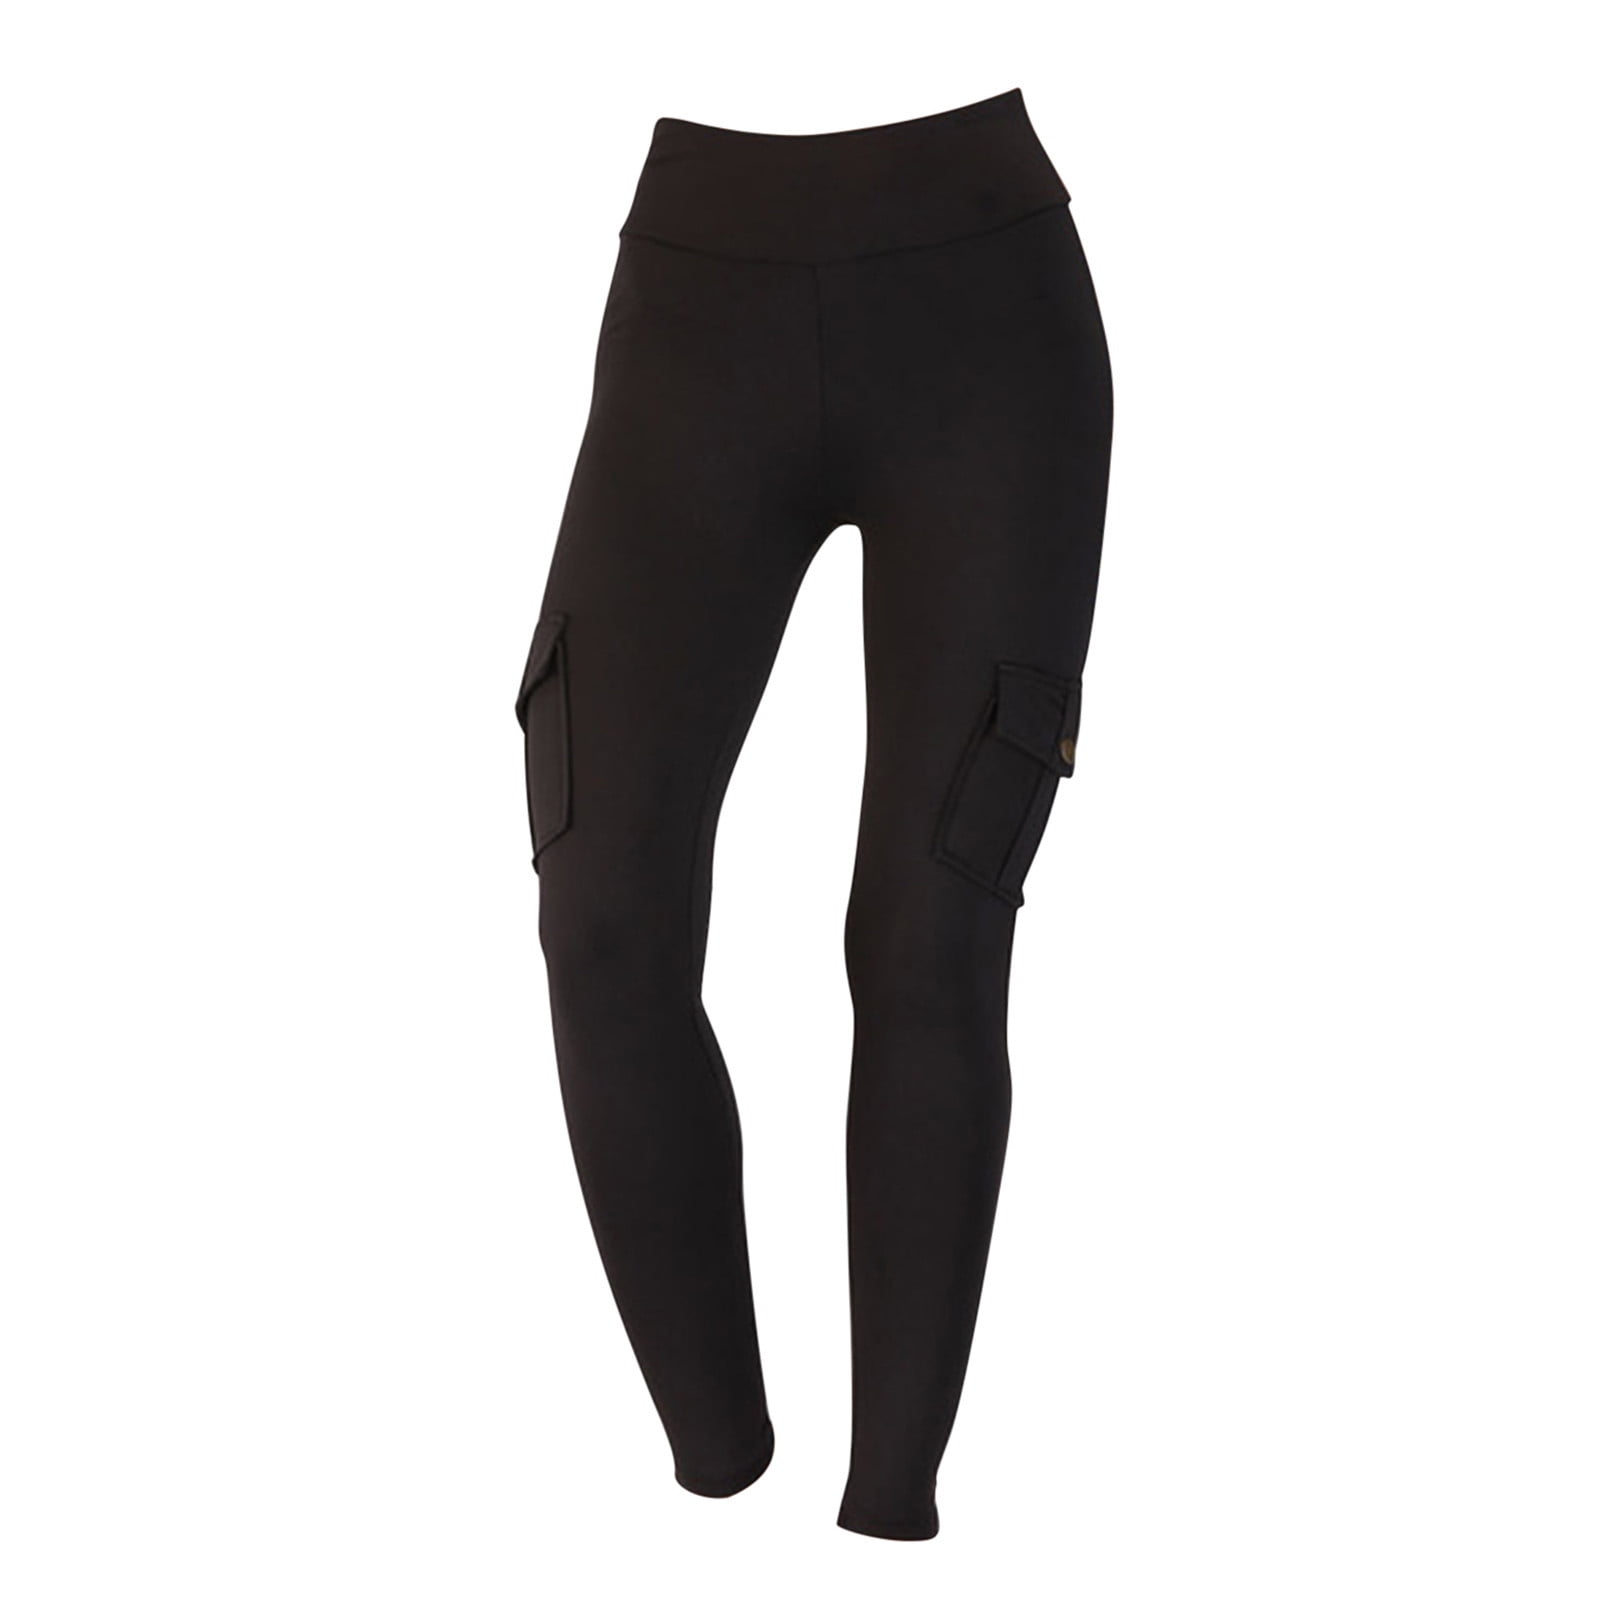 Do you have any favorite brands for athletic leggings, yoga pants, etc.? -  Quora